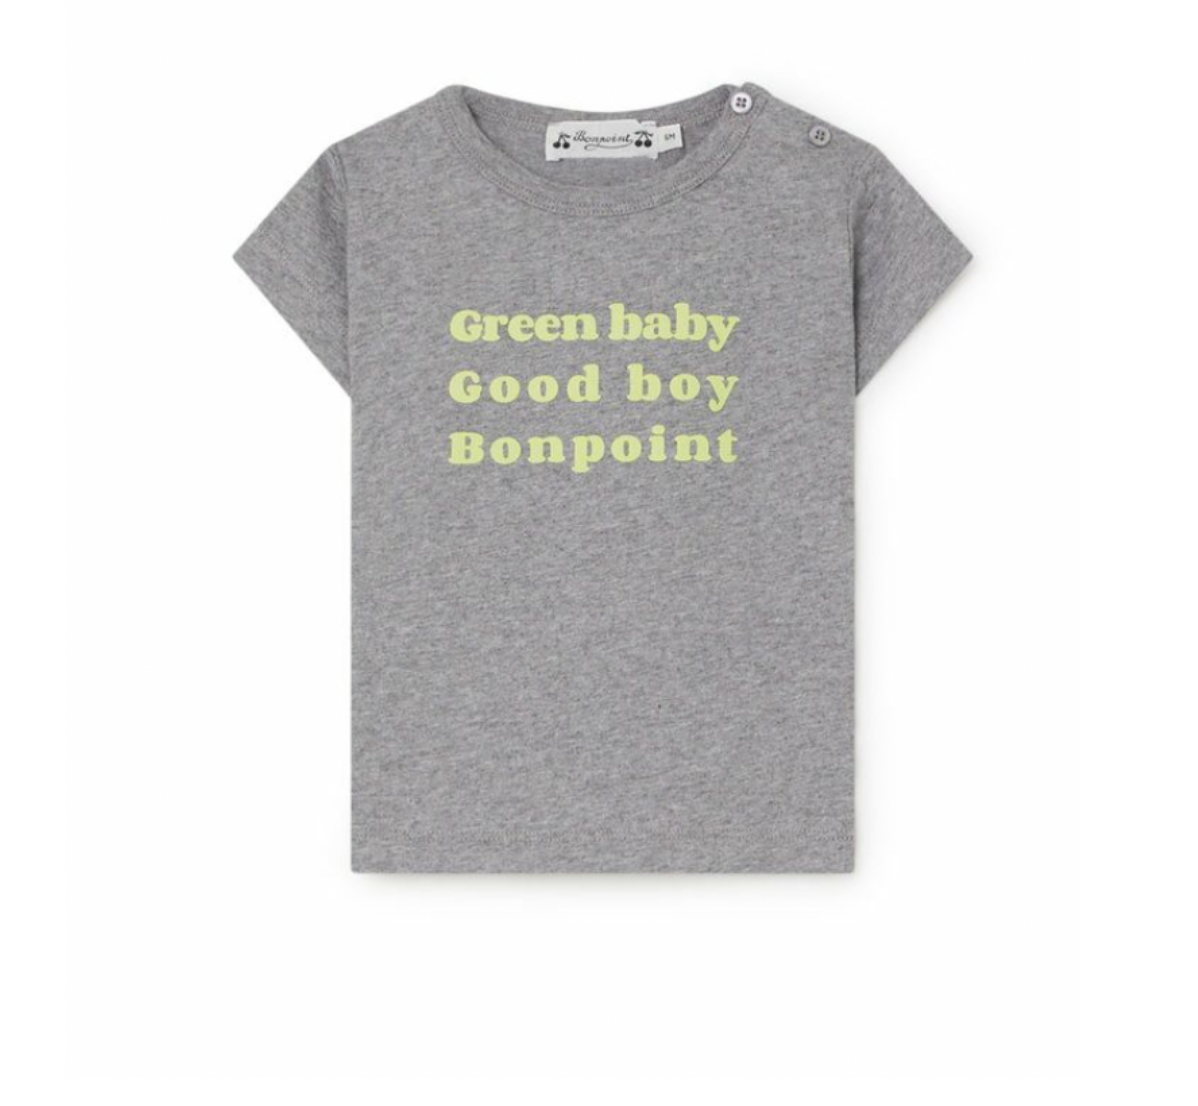 BONPOINT - T-shirt gris chiné green baby - 6 mois